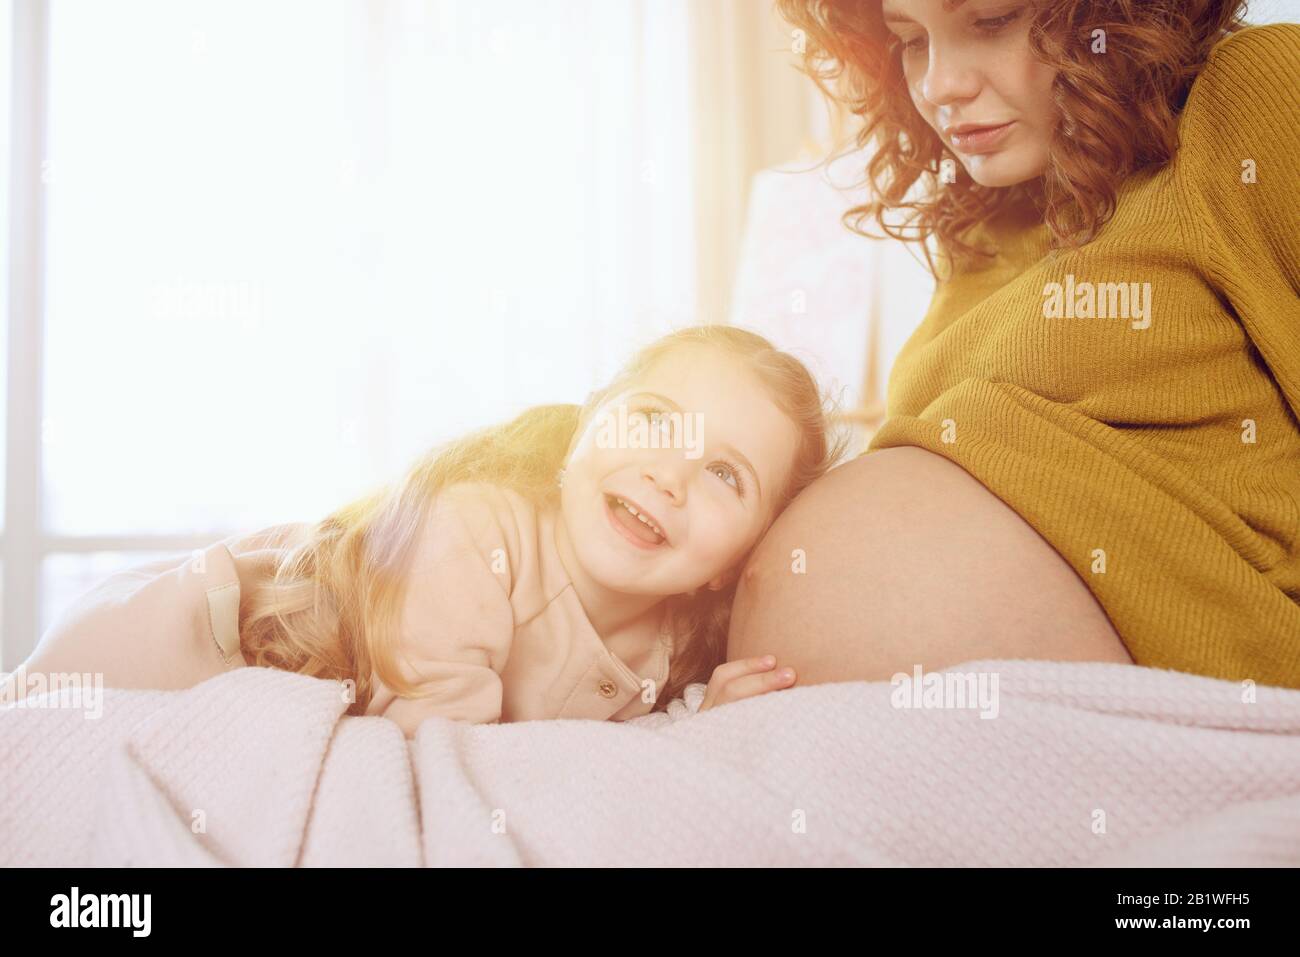 Pregnant mom plays with her daughter. Concept of family, joy and pregnancy Stock Photo